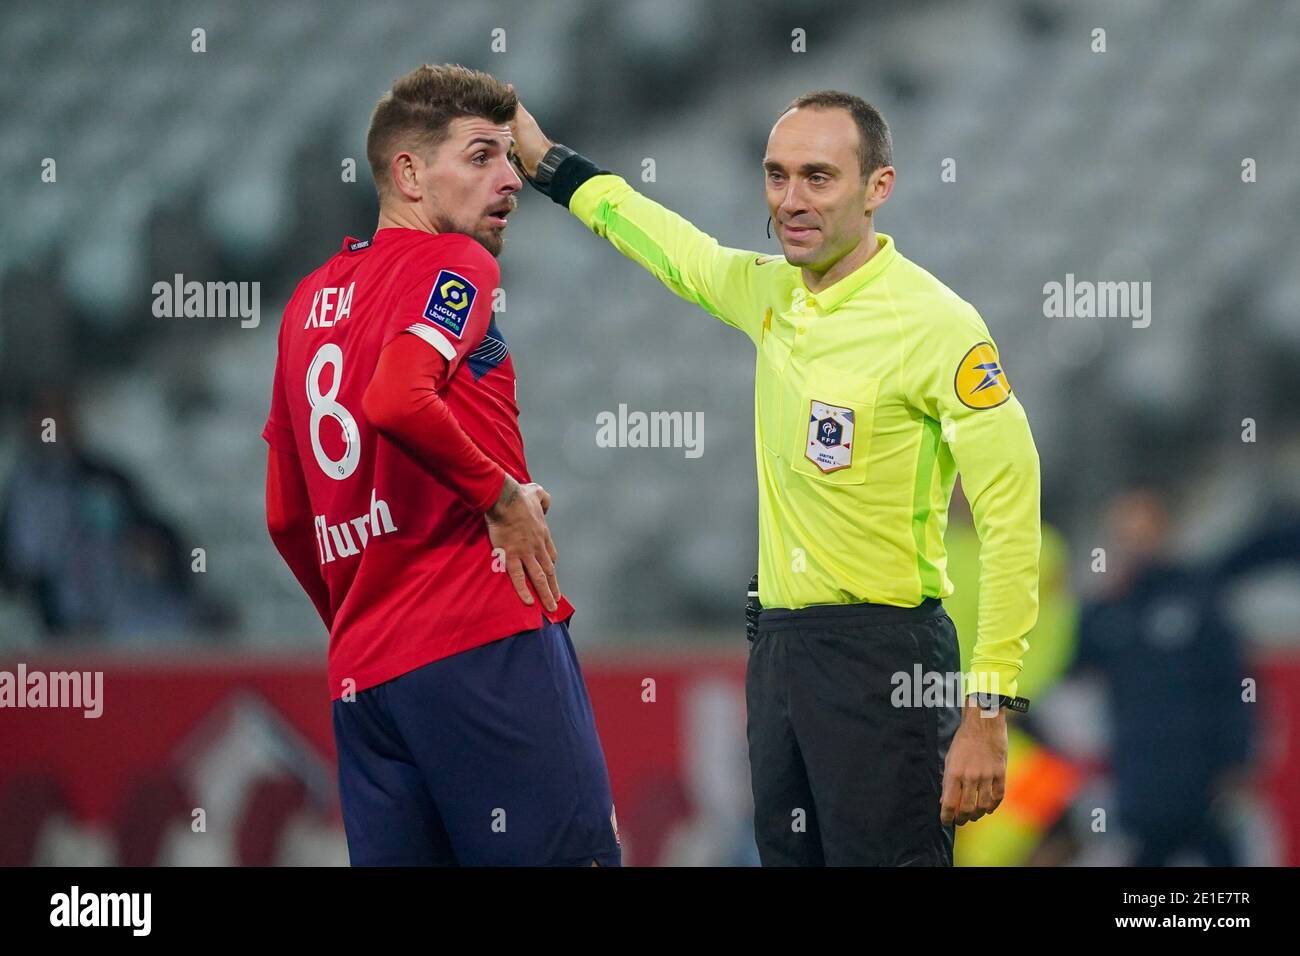 LILLE, FRANCE - JANUARY 6: Xeka of Lille OSC, referee Thomas Leonard during the Ligue 1 match between Lille OSC and Angers SCO at Stade Pierre Mauroy on January 6, 2021 in Lille, France (Photo by Jeroen Meuwsen/BSR Agency/Alamy Live News)*** Local Caption *** Xeka, Thomas Leonard Stock Photo